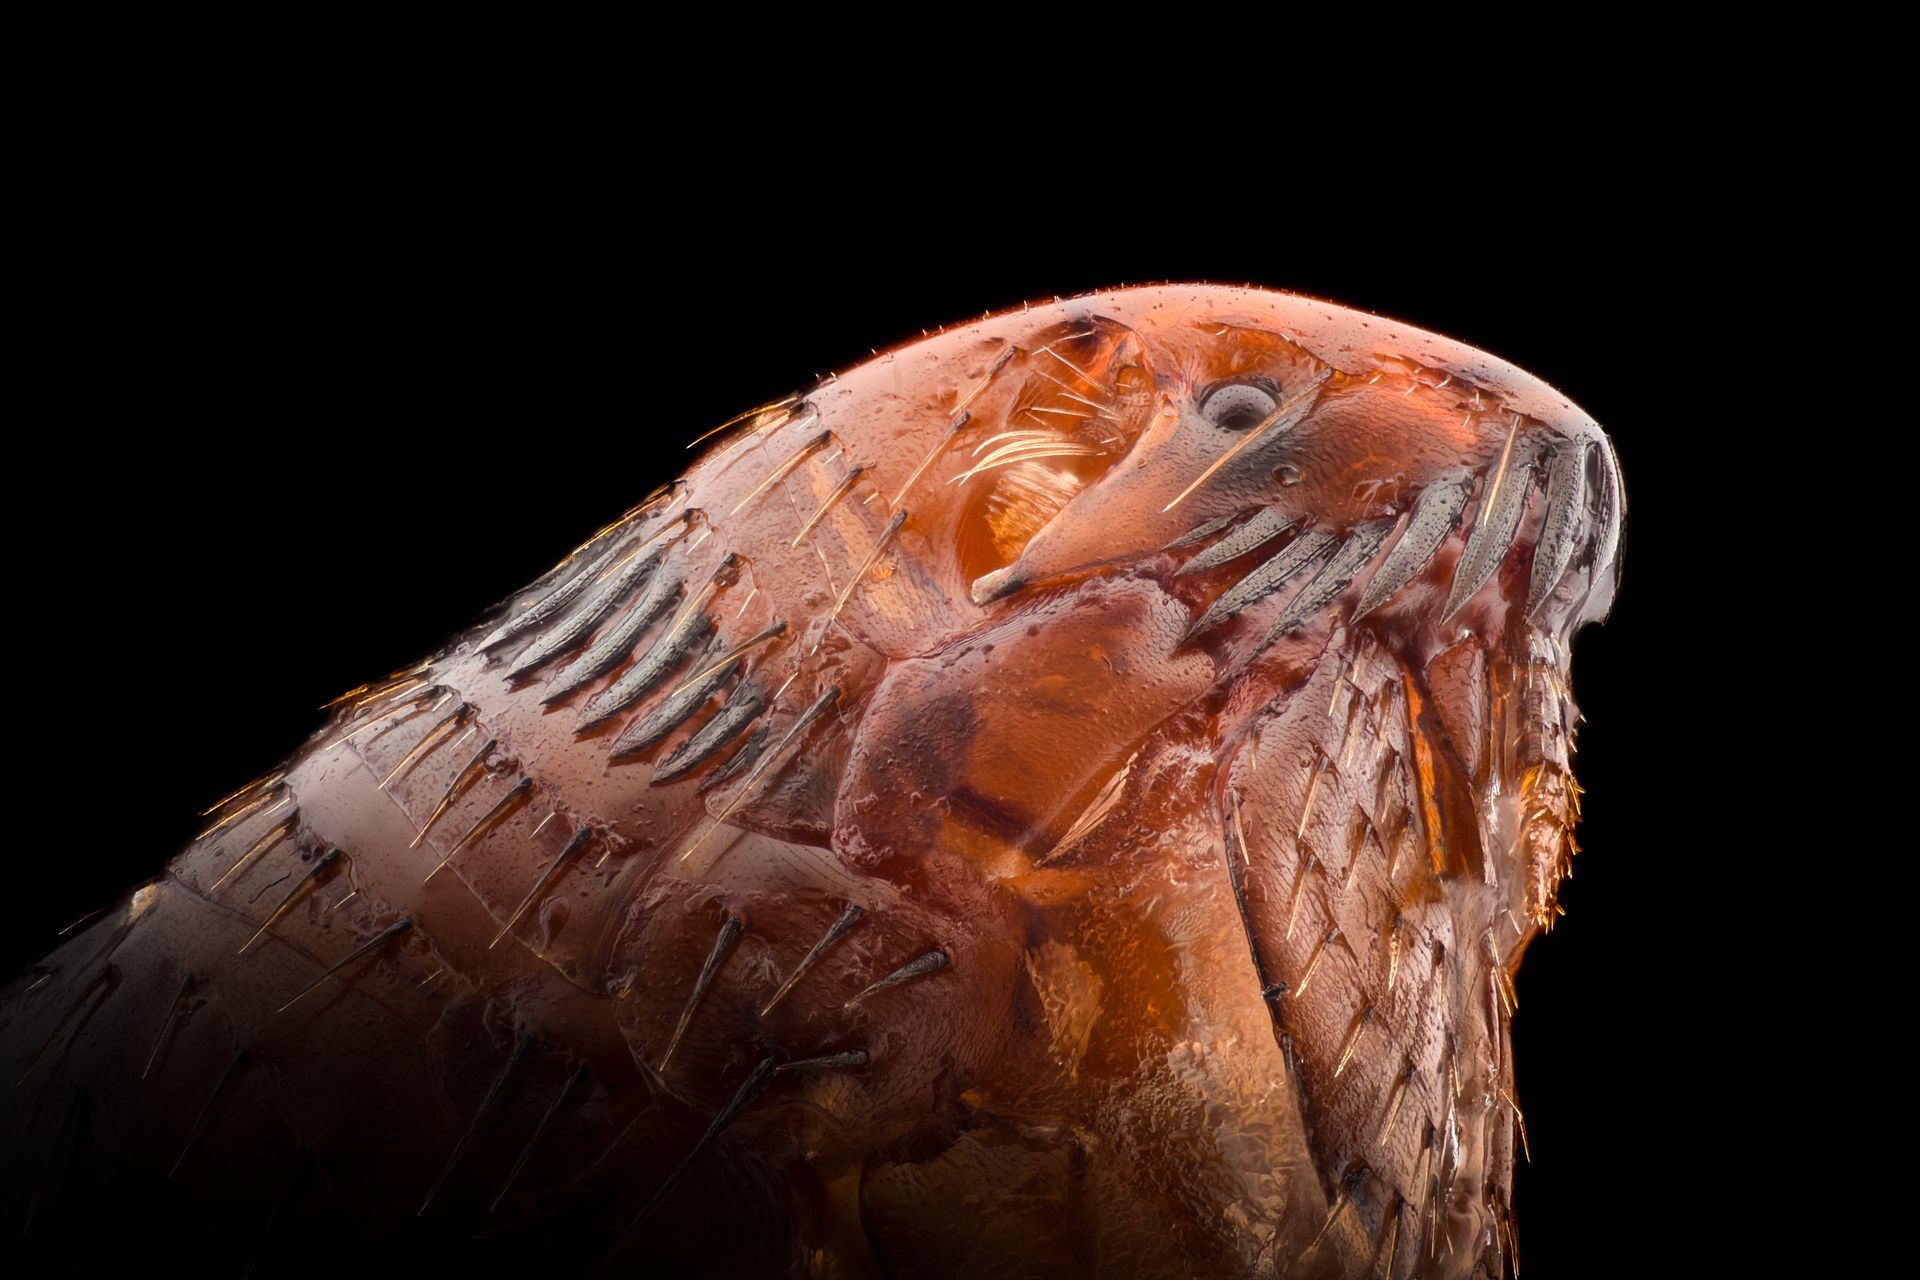 A close up of a flea on a black background.